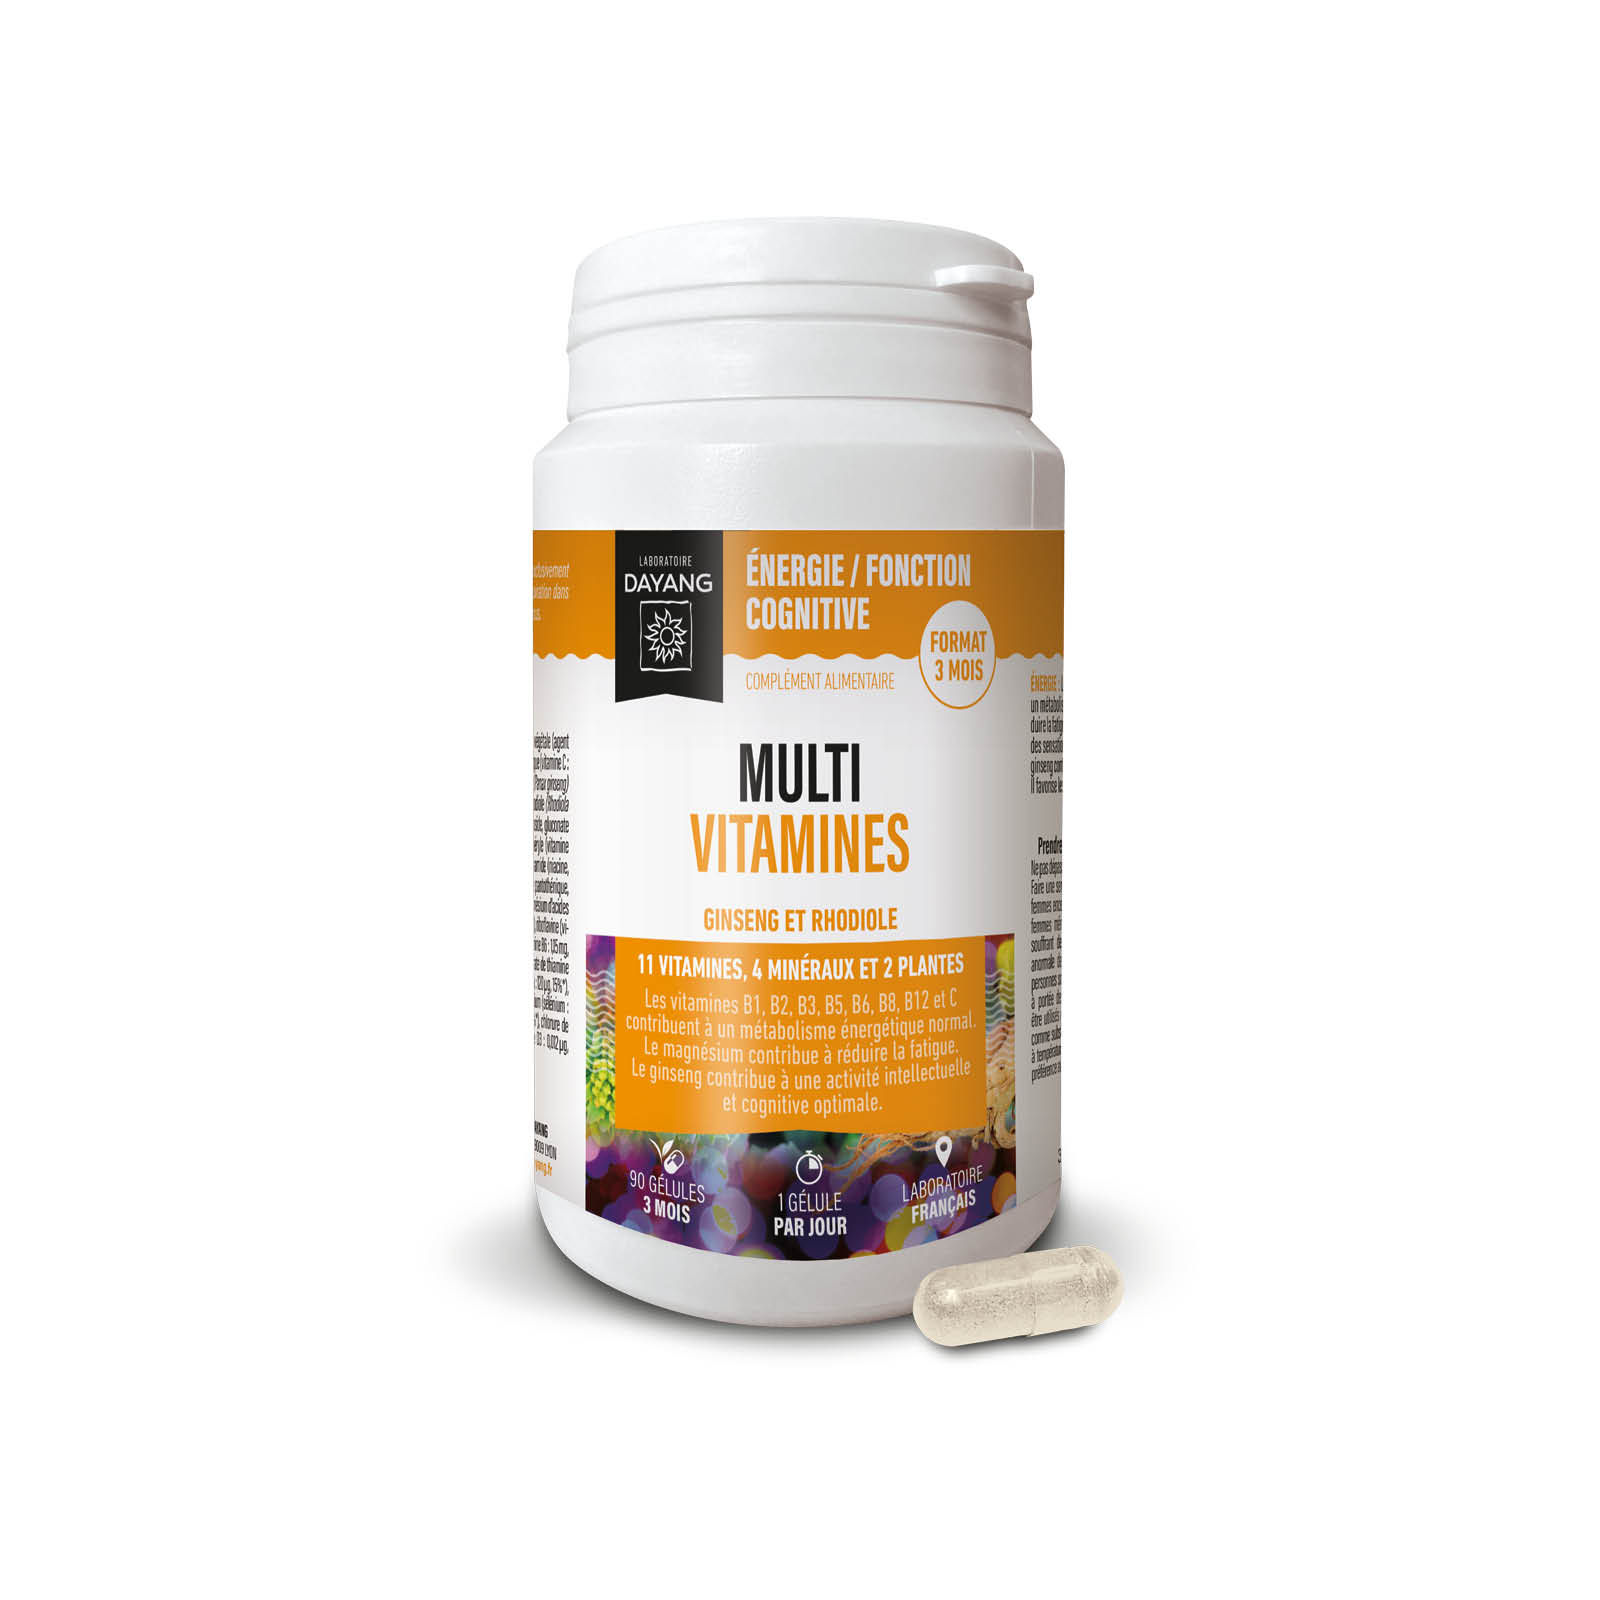 Multivitamines ginseng rhodiole - 3 mois